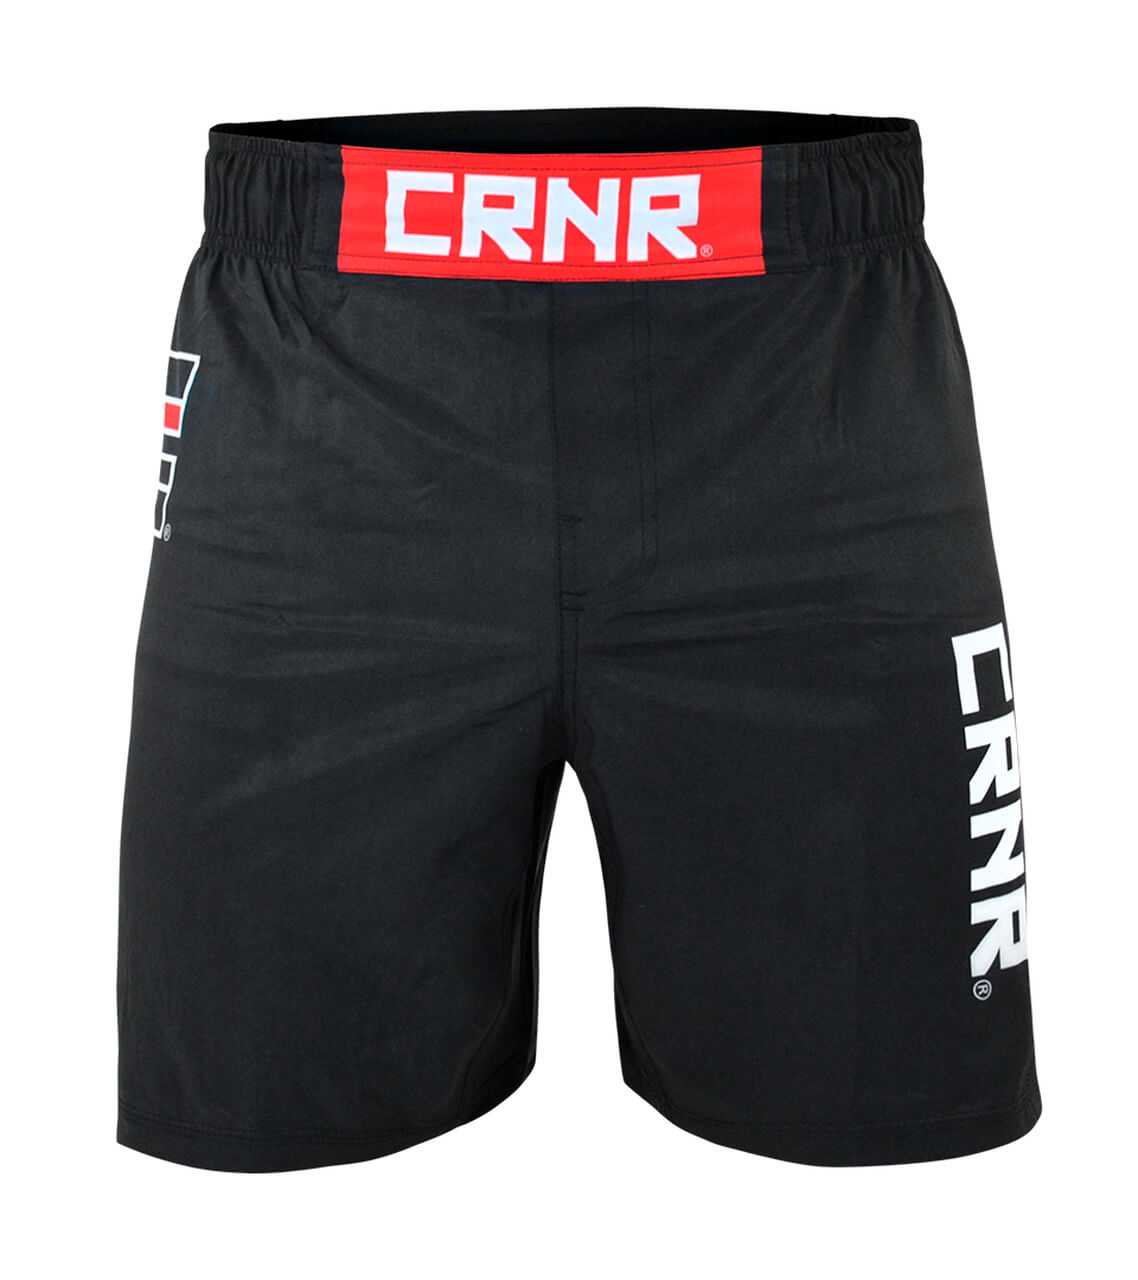 CRNR Combat Trainers Shorts FRONT  10960.1568733793